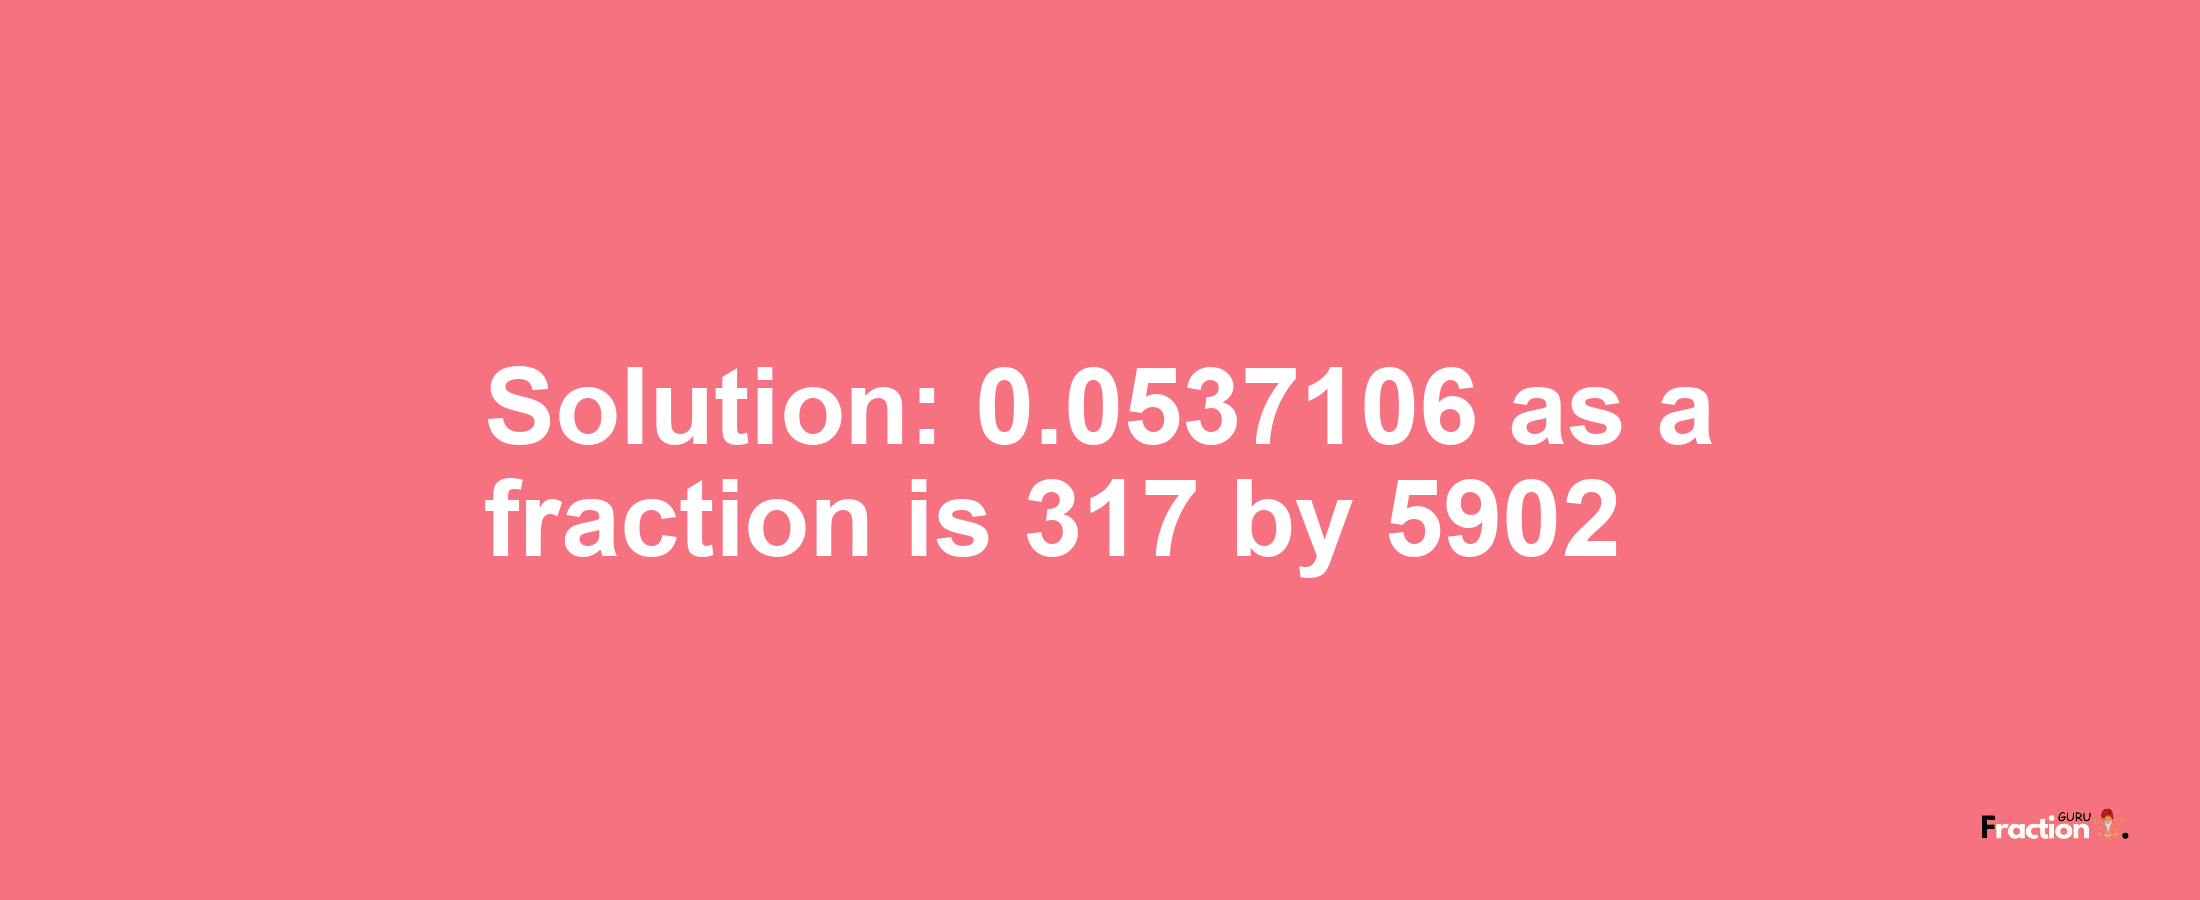 Solution:0.0537106 as a fraction is 317/5902